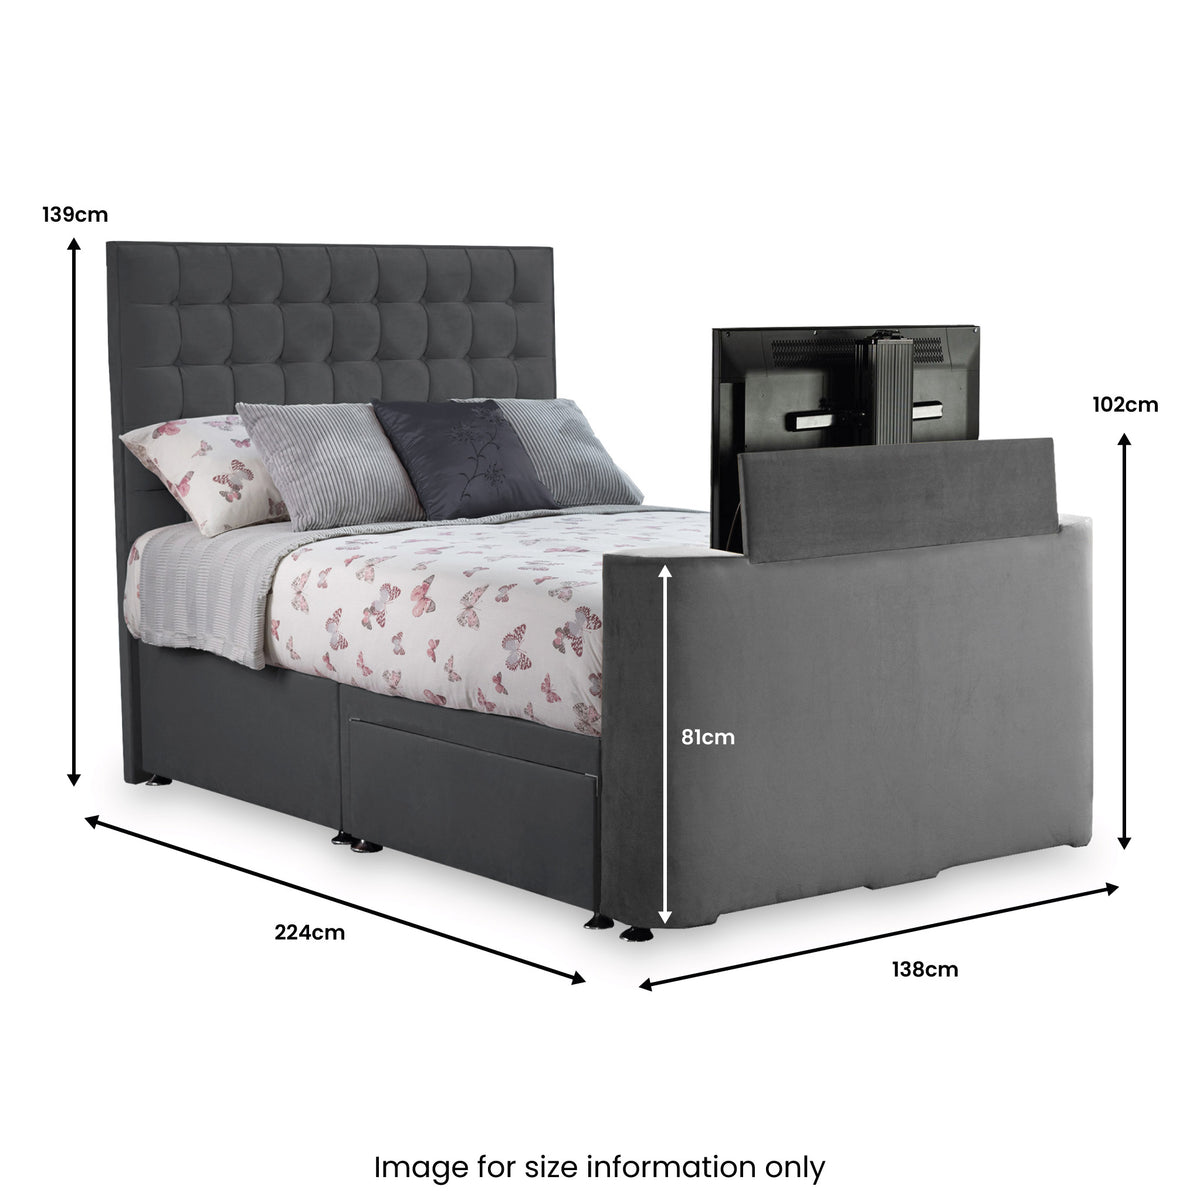 Bridgeford 2 Drawer TV Bed Dimensions from Roseland Furniture